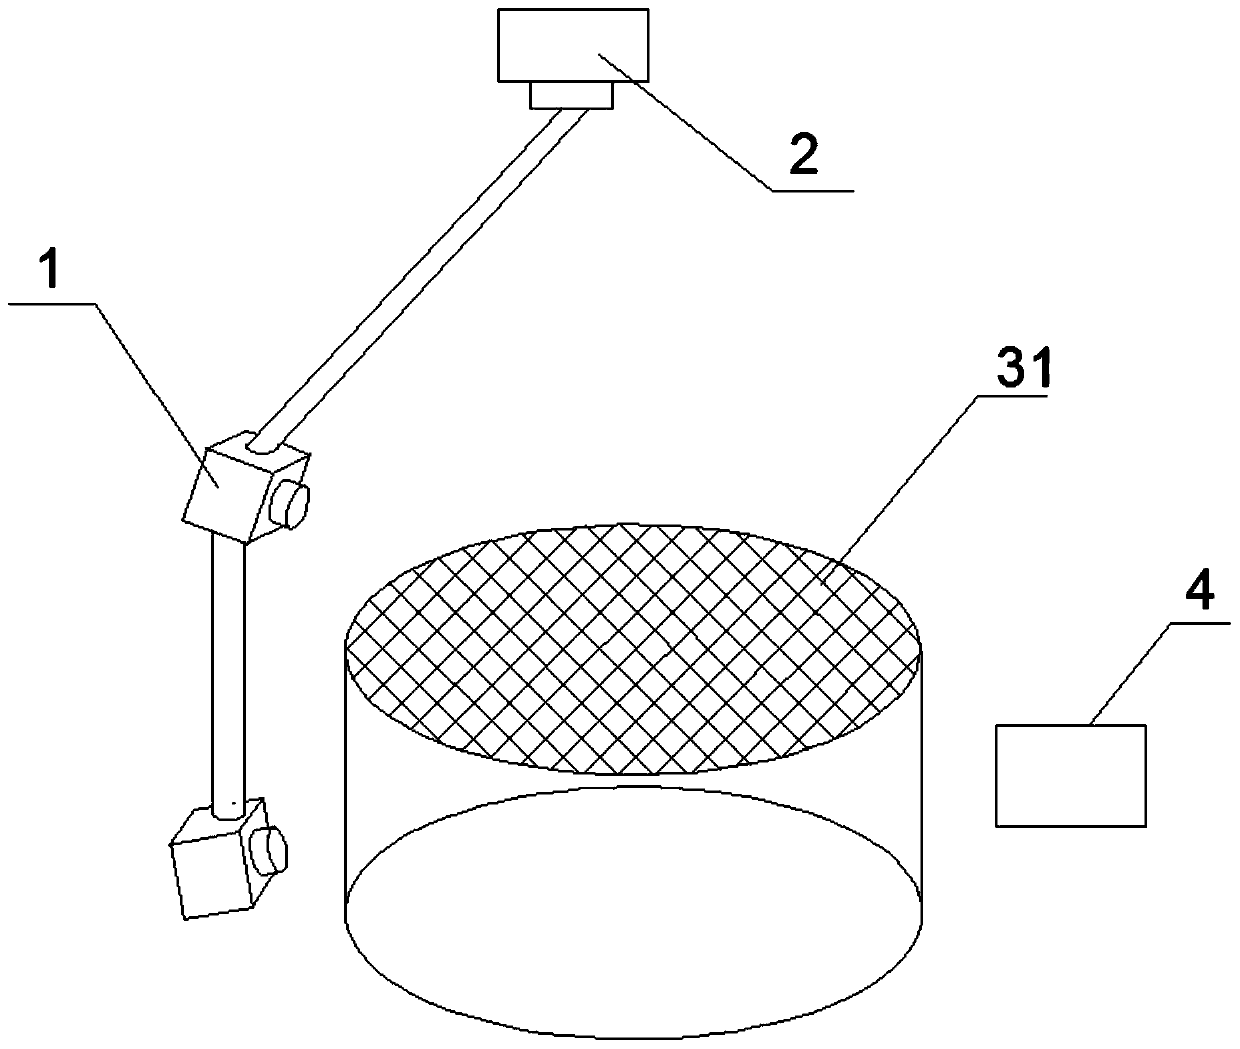 A device for 360° 3D measurement and information acquisition of objects